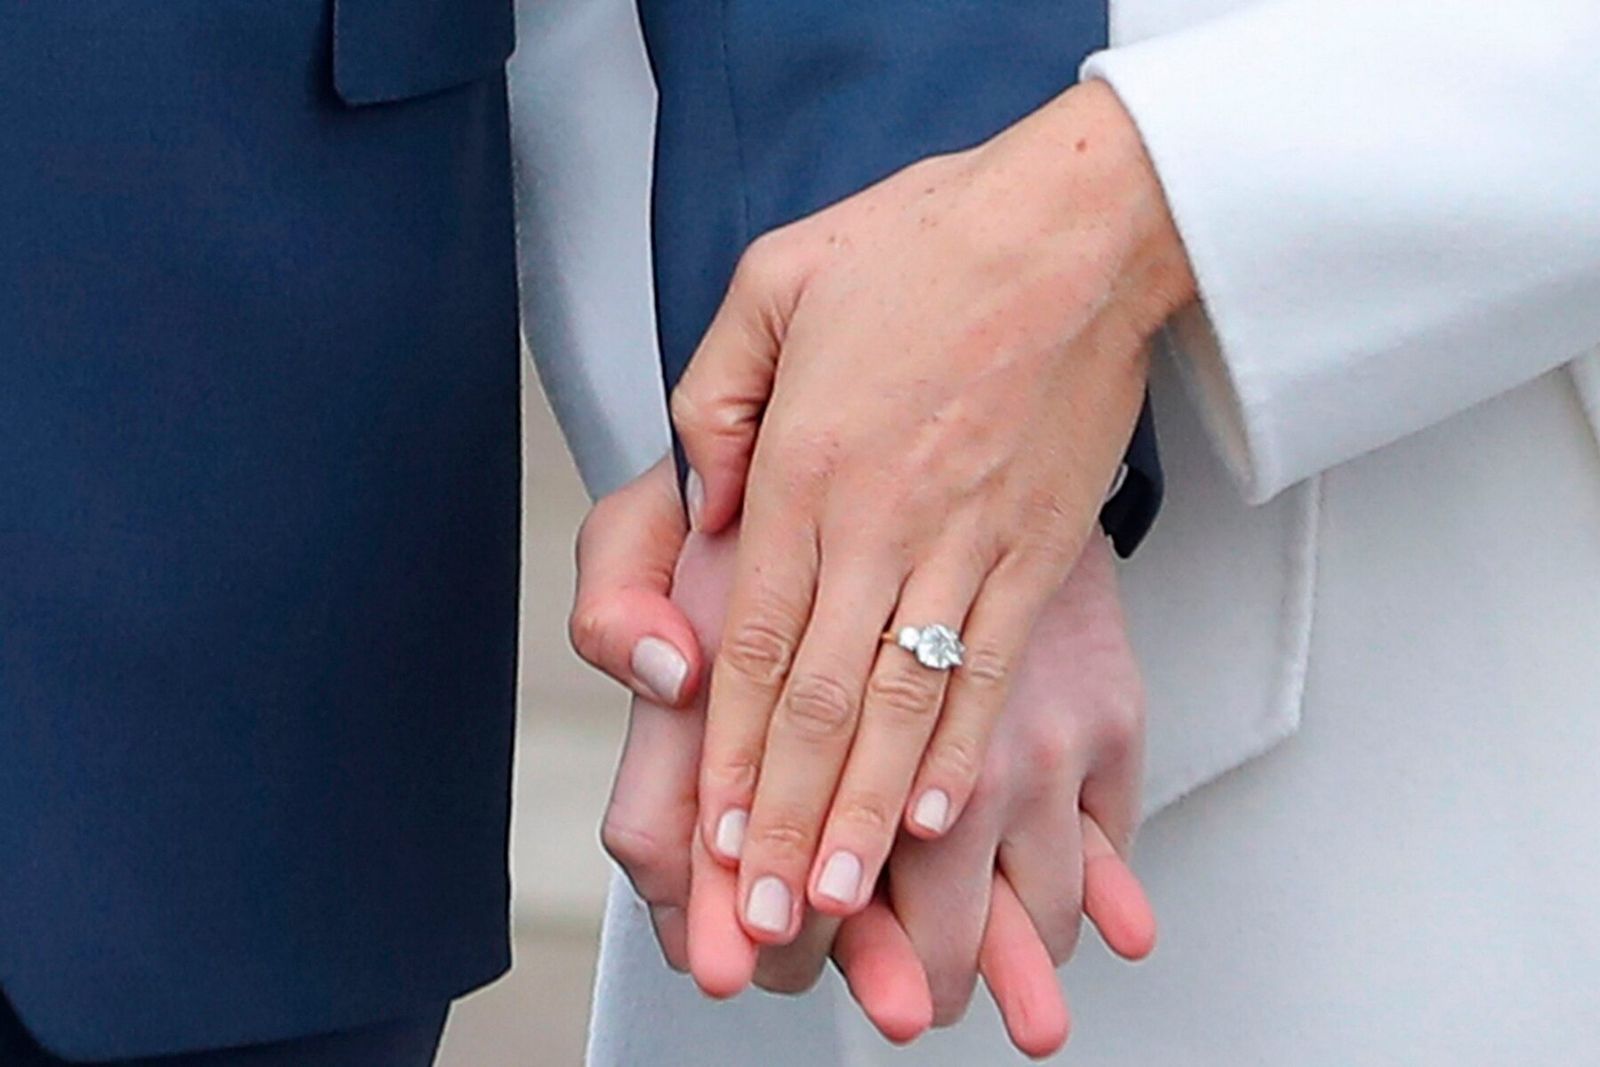 The Duchess of Sussex Meghan Markle's 6 carat cushion-cut diamond engagement ring with two round brilliant-cut diamond side stones